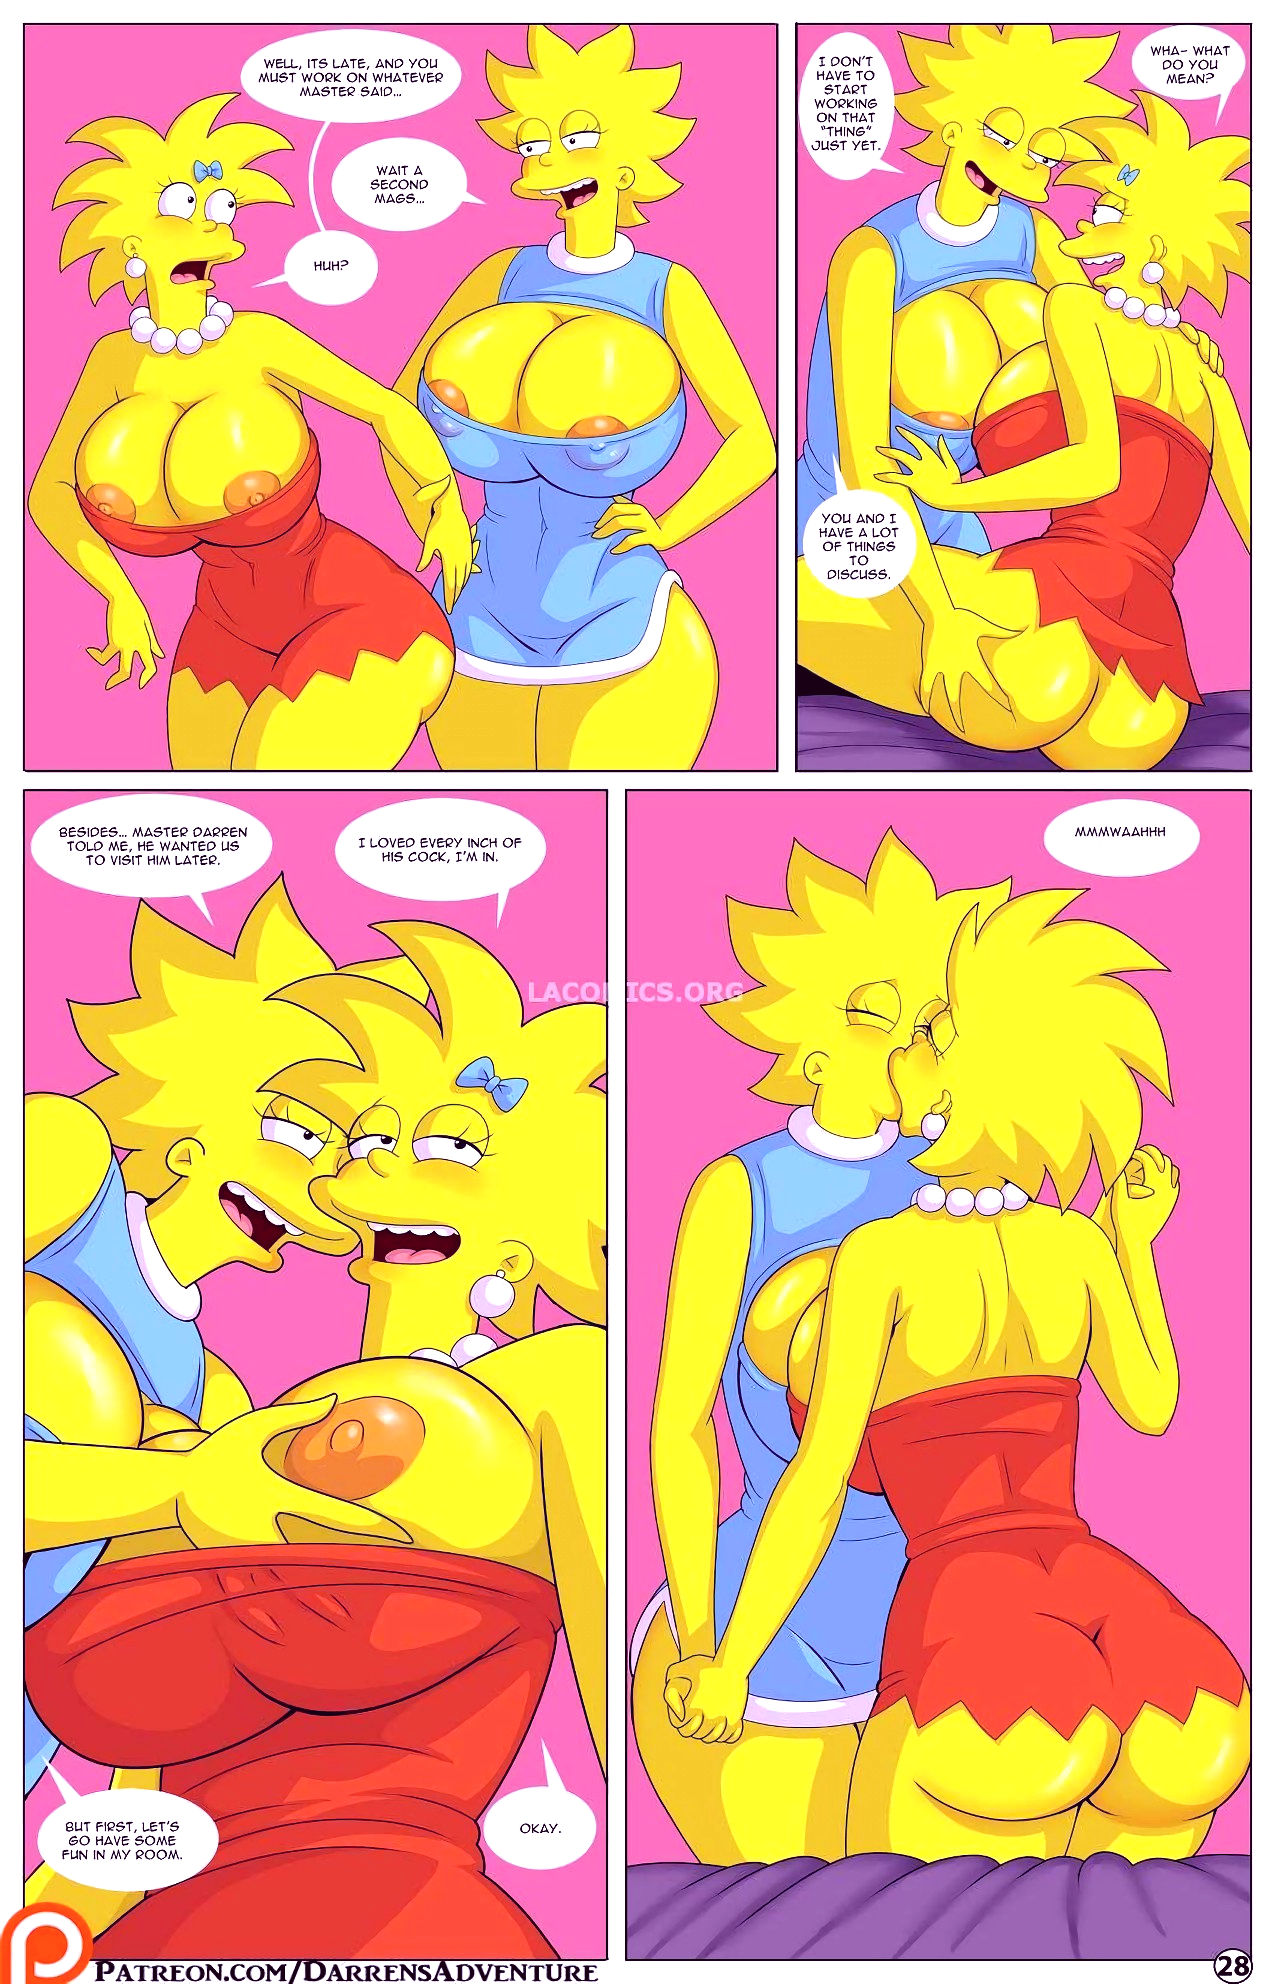 Darrens adventure or welcome to springfield porn comic picture 106